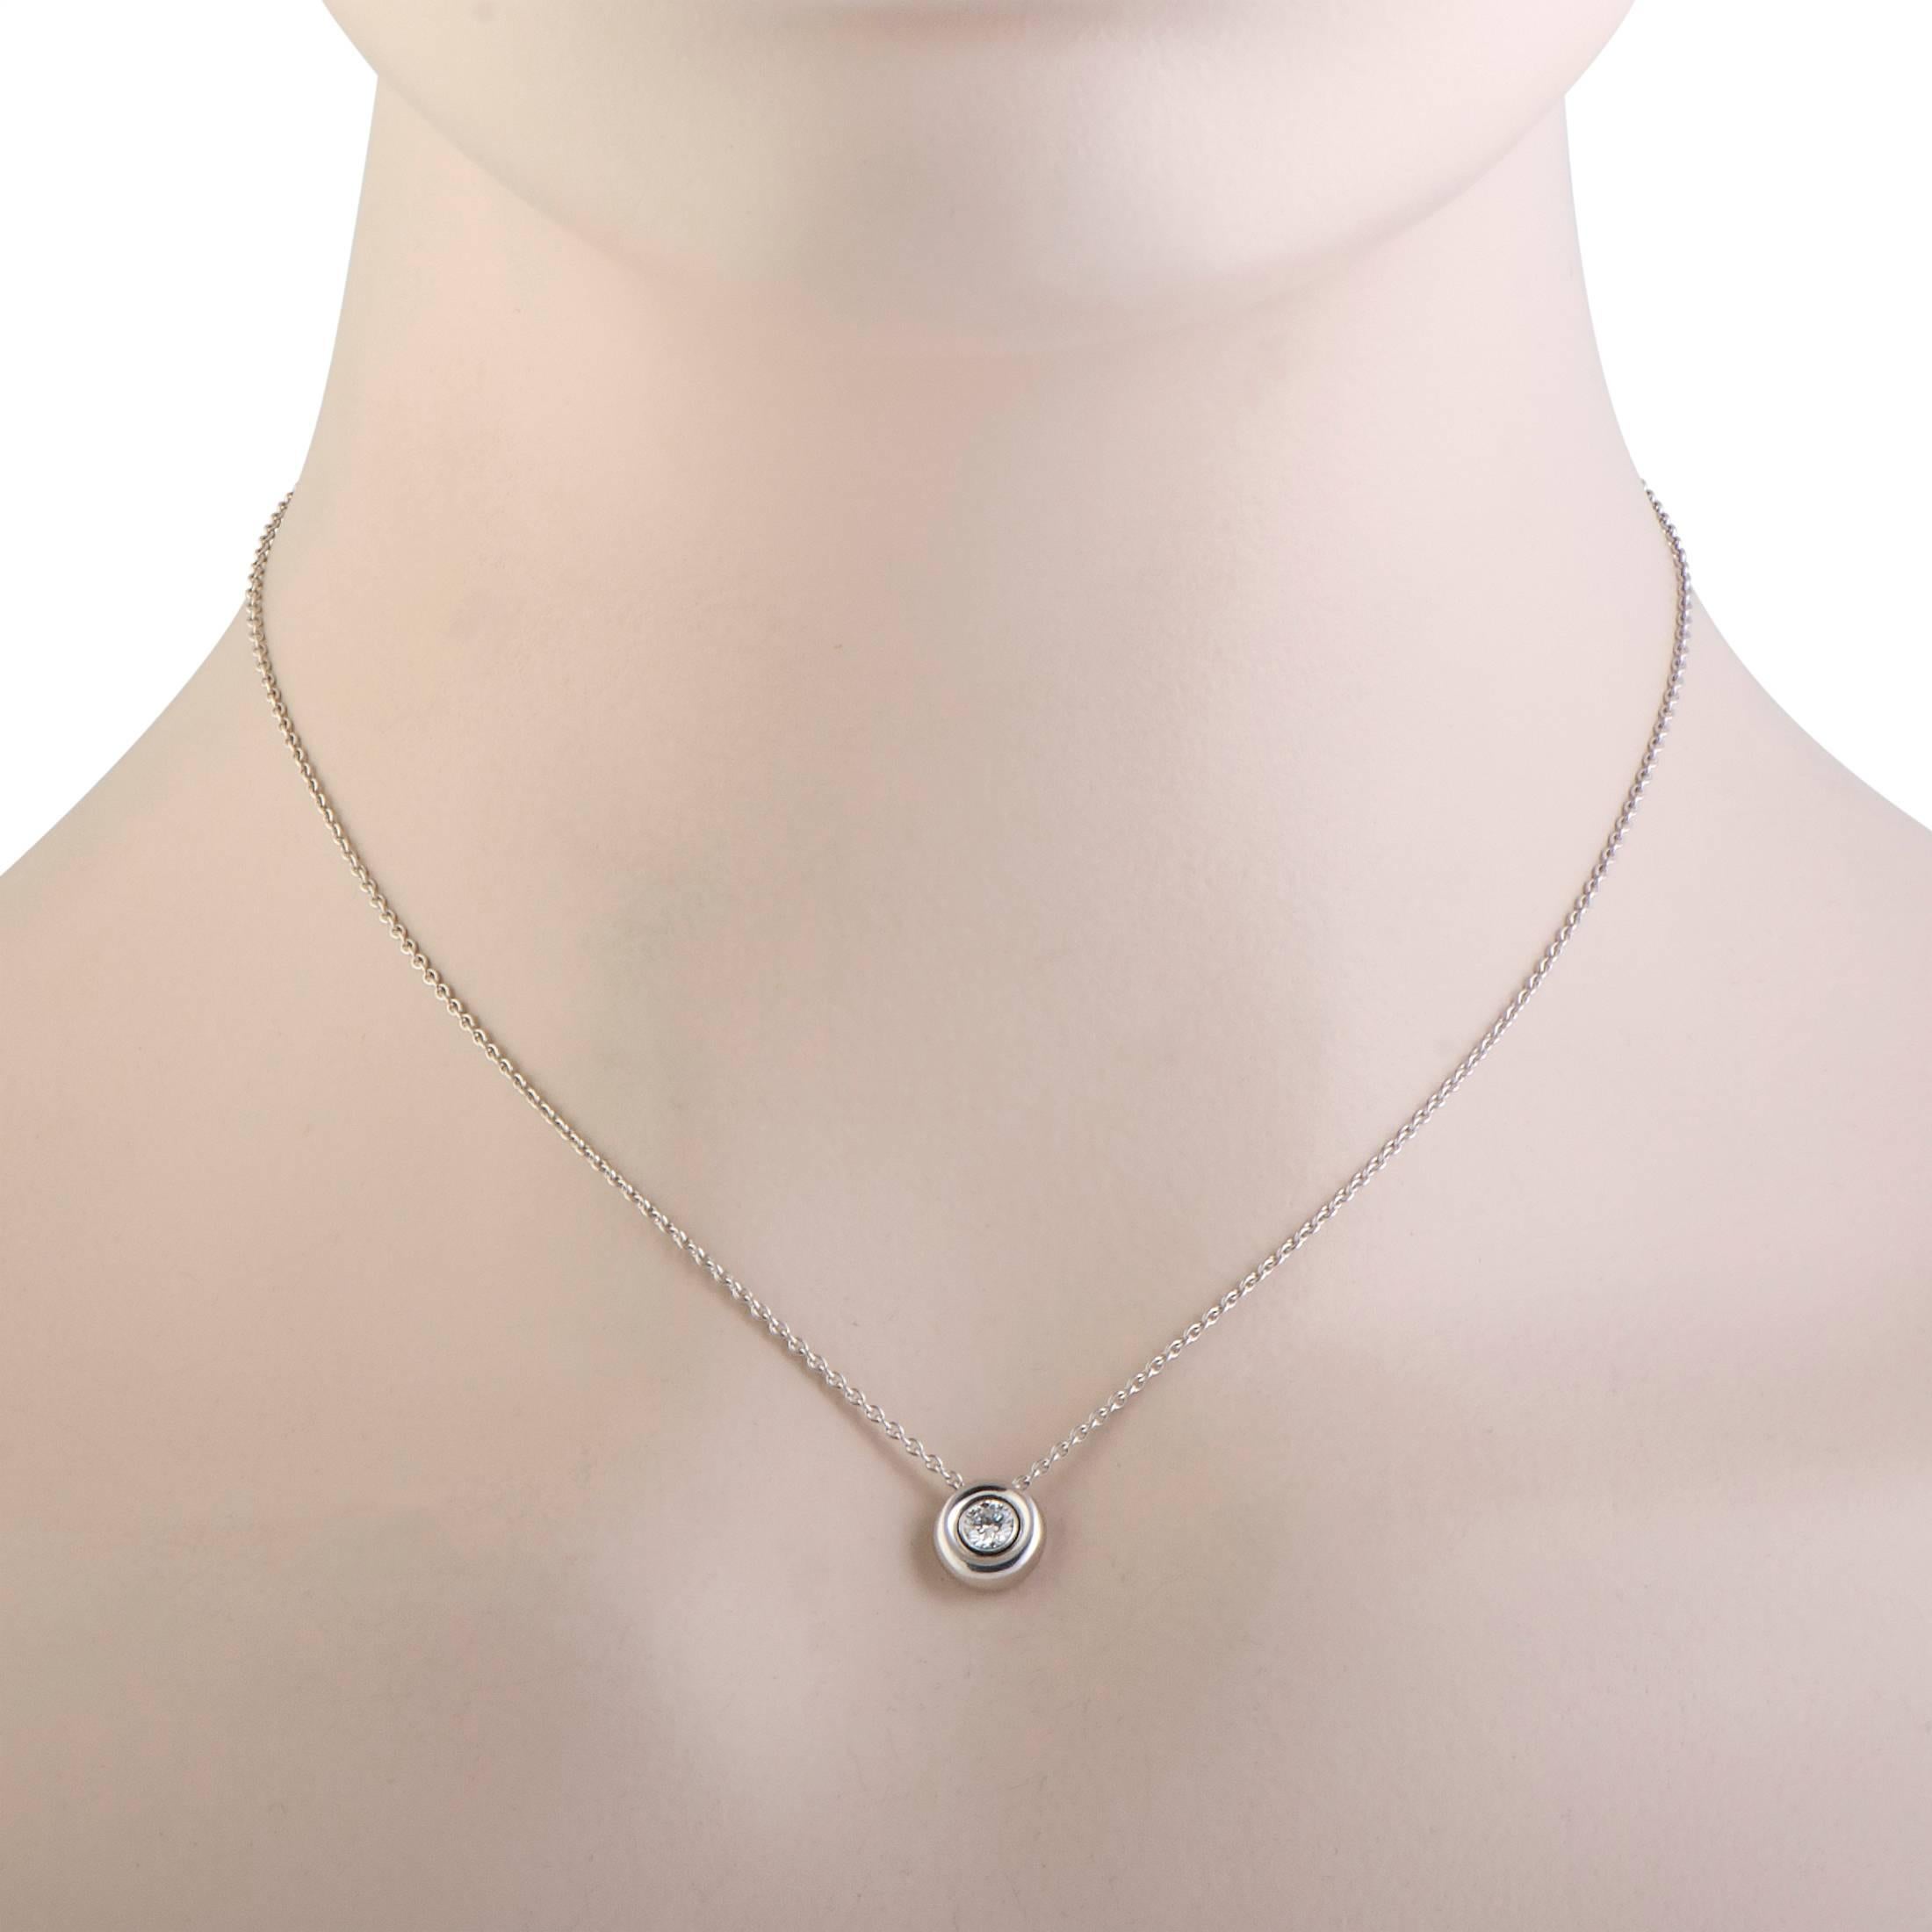 A fantastic expression of understated prestige, timeless elegance, and graceful femininity, this magnificent necklace from Chaumet is made of spotless 18K white gold and adorned with a subtle diamond weighing 0.30 carats.
Chain Length 16